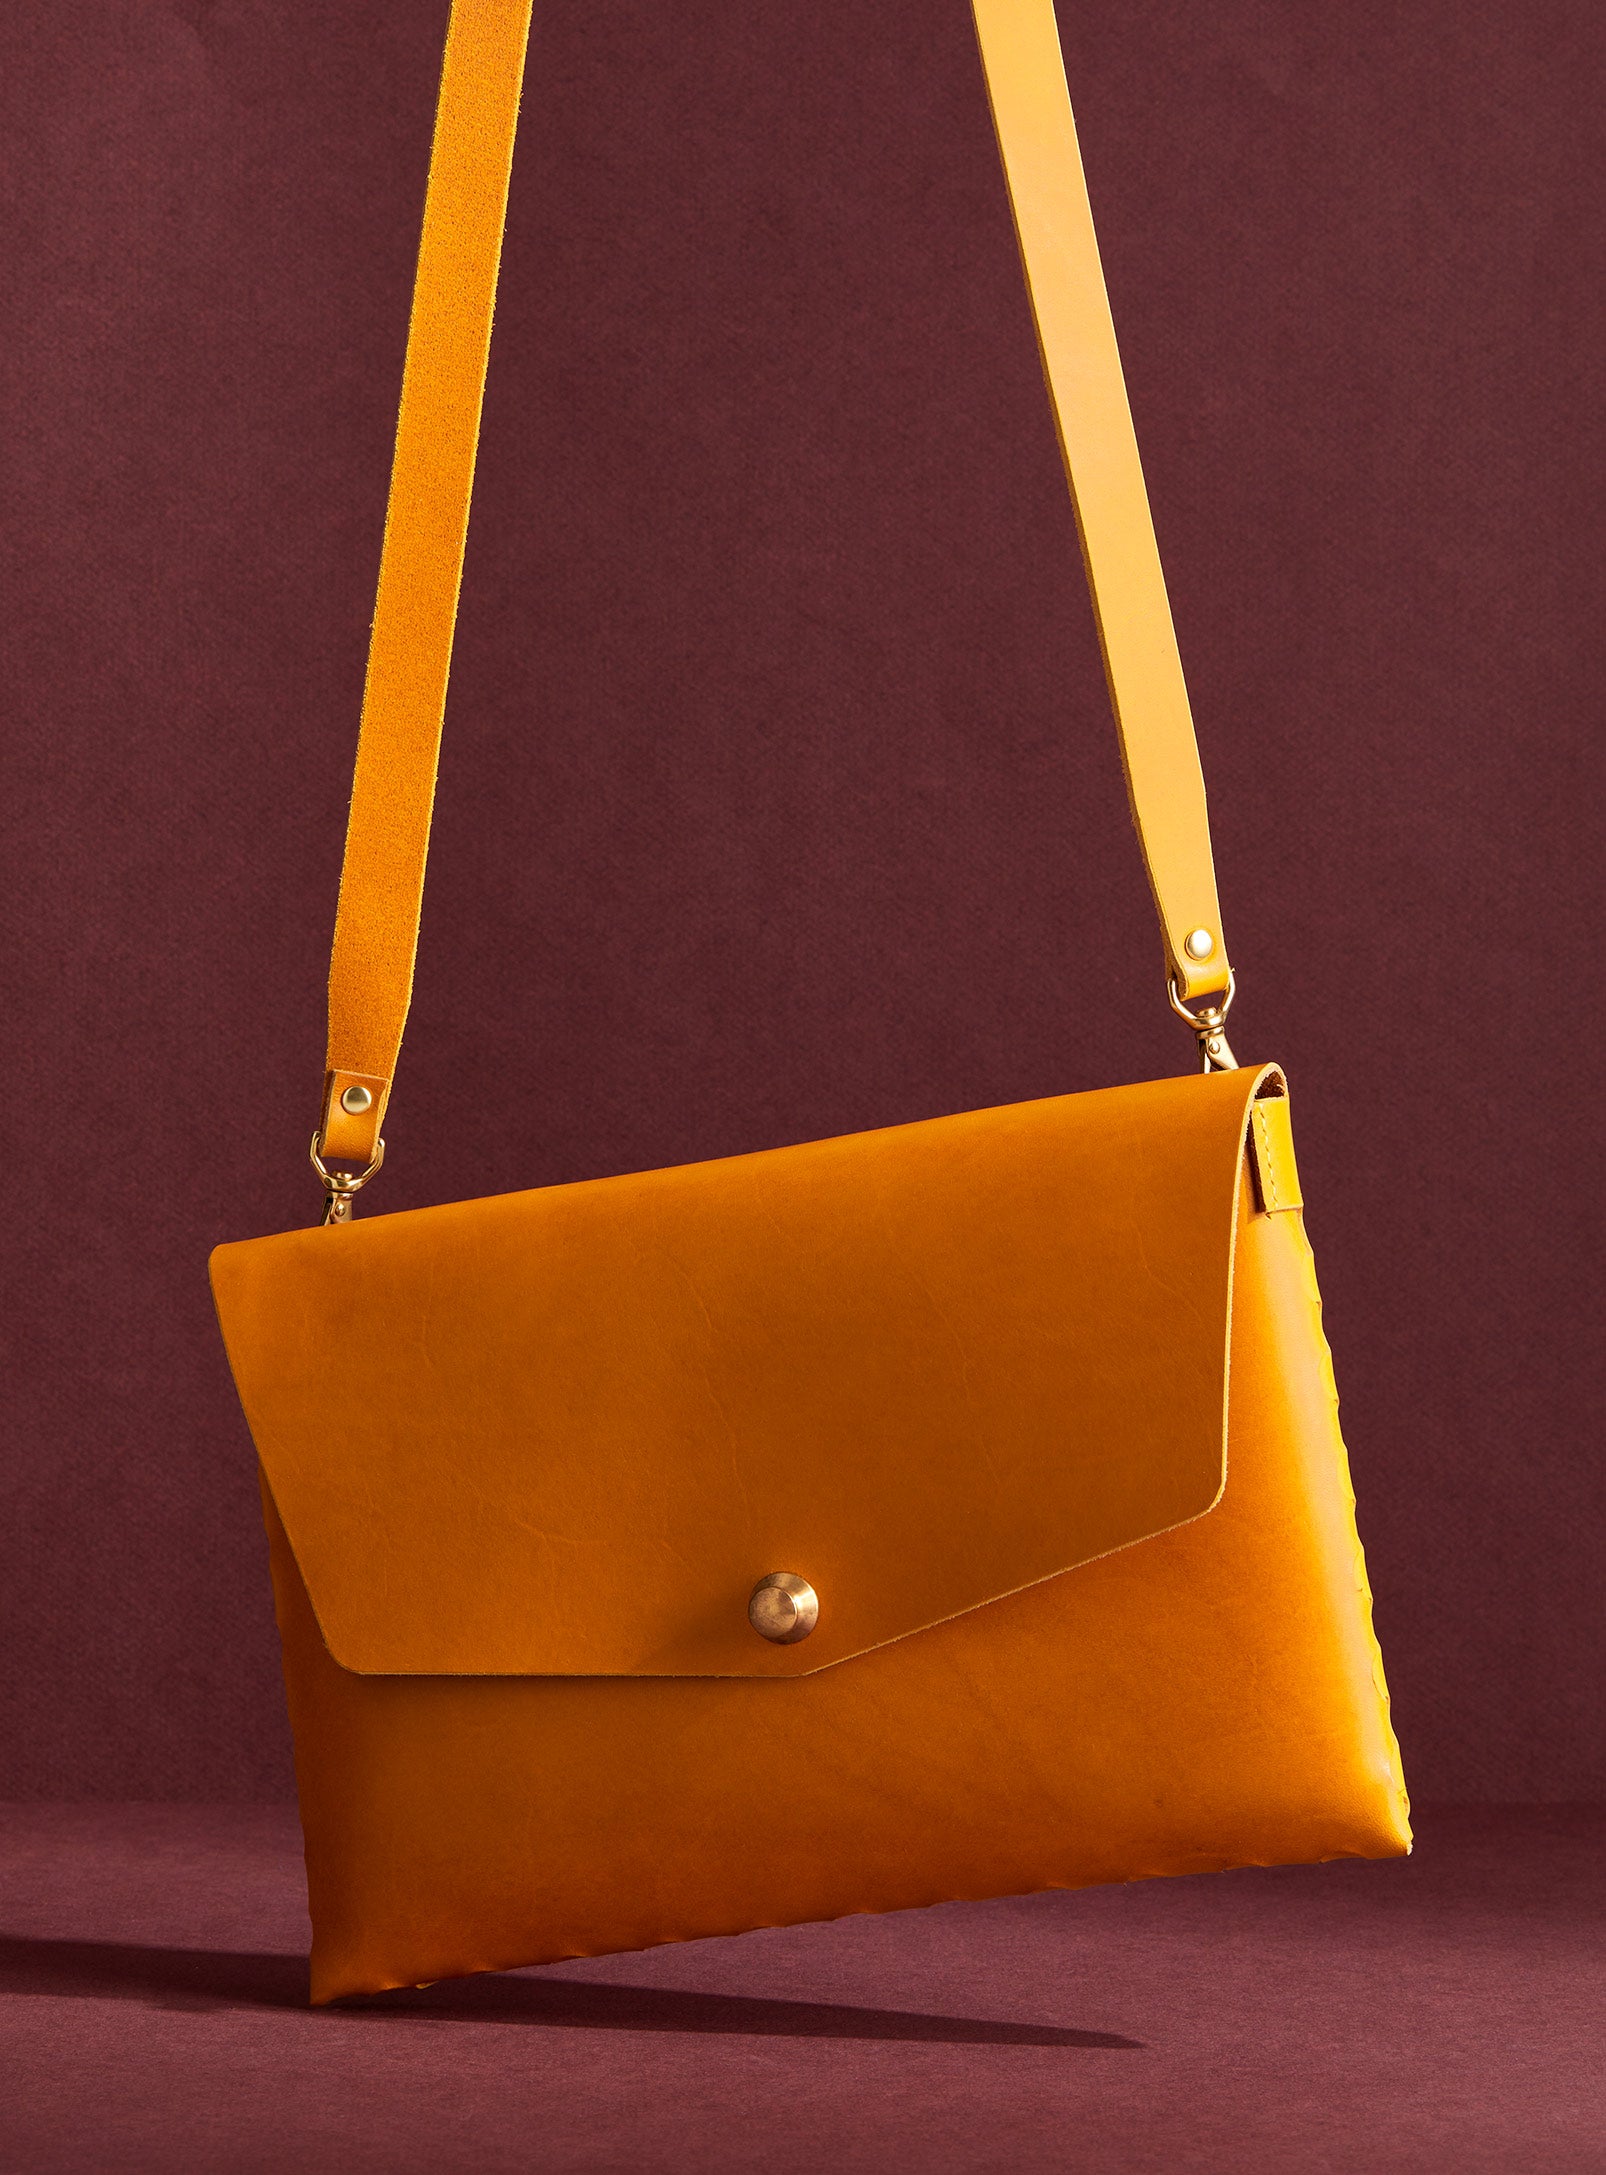 modjūl’s leather mini bag deluxe bag in yellow. A larger take on the classic mini bag, a rectangular-shaped bag with long detachable straps, handcrafted in Canada using quality Italian leather and brass hardware.